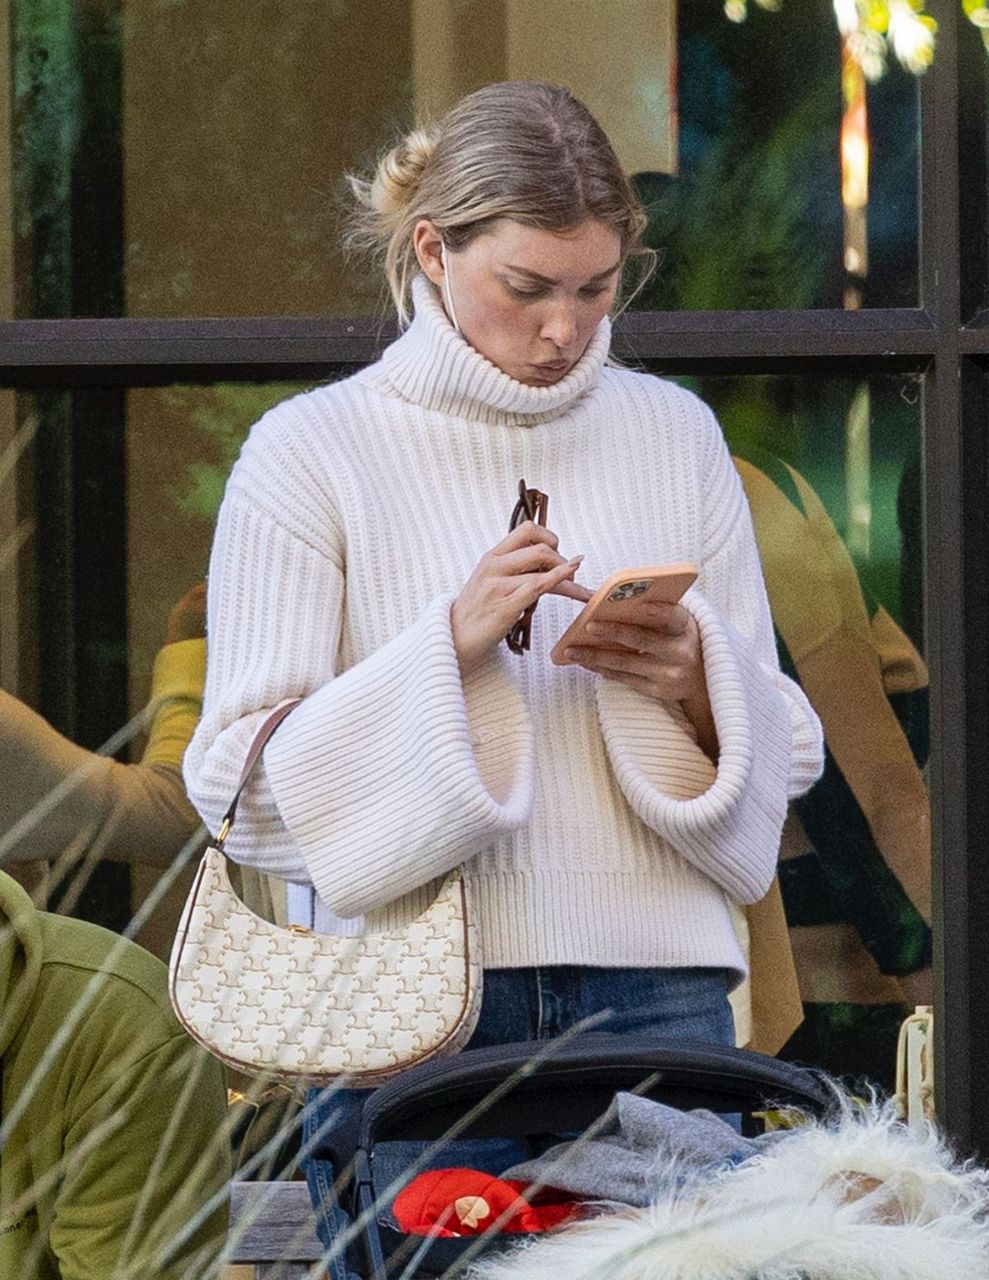 Elsa Hosk Out And About Pasadena